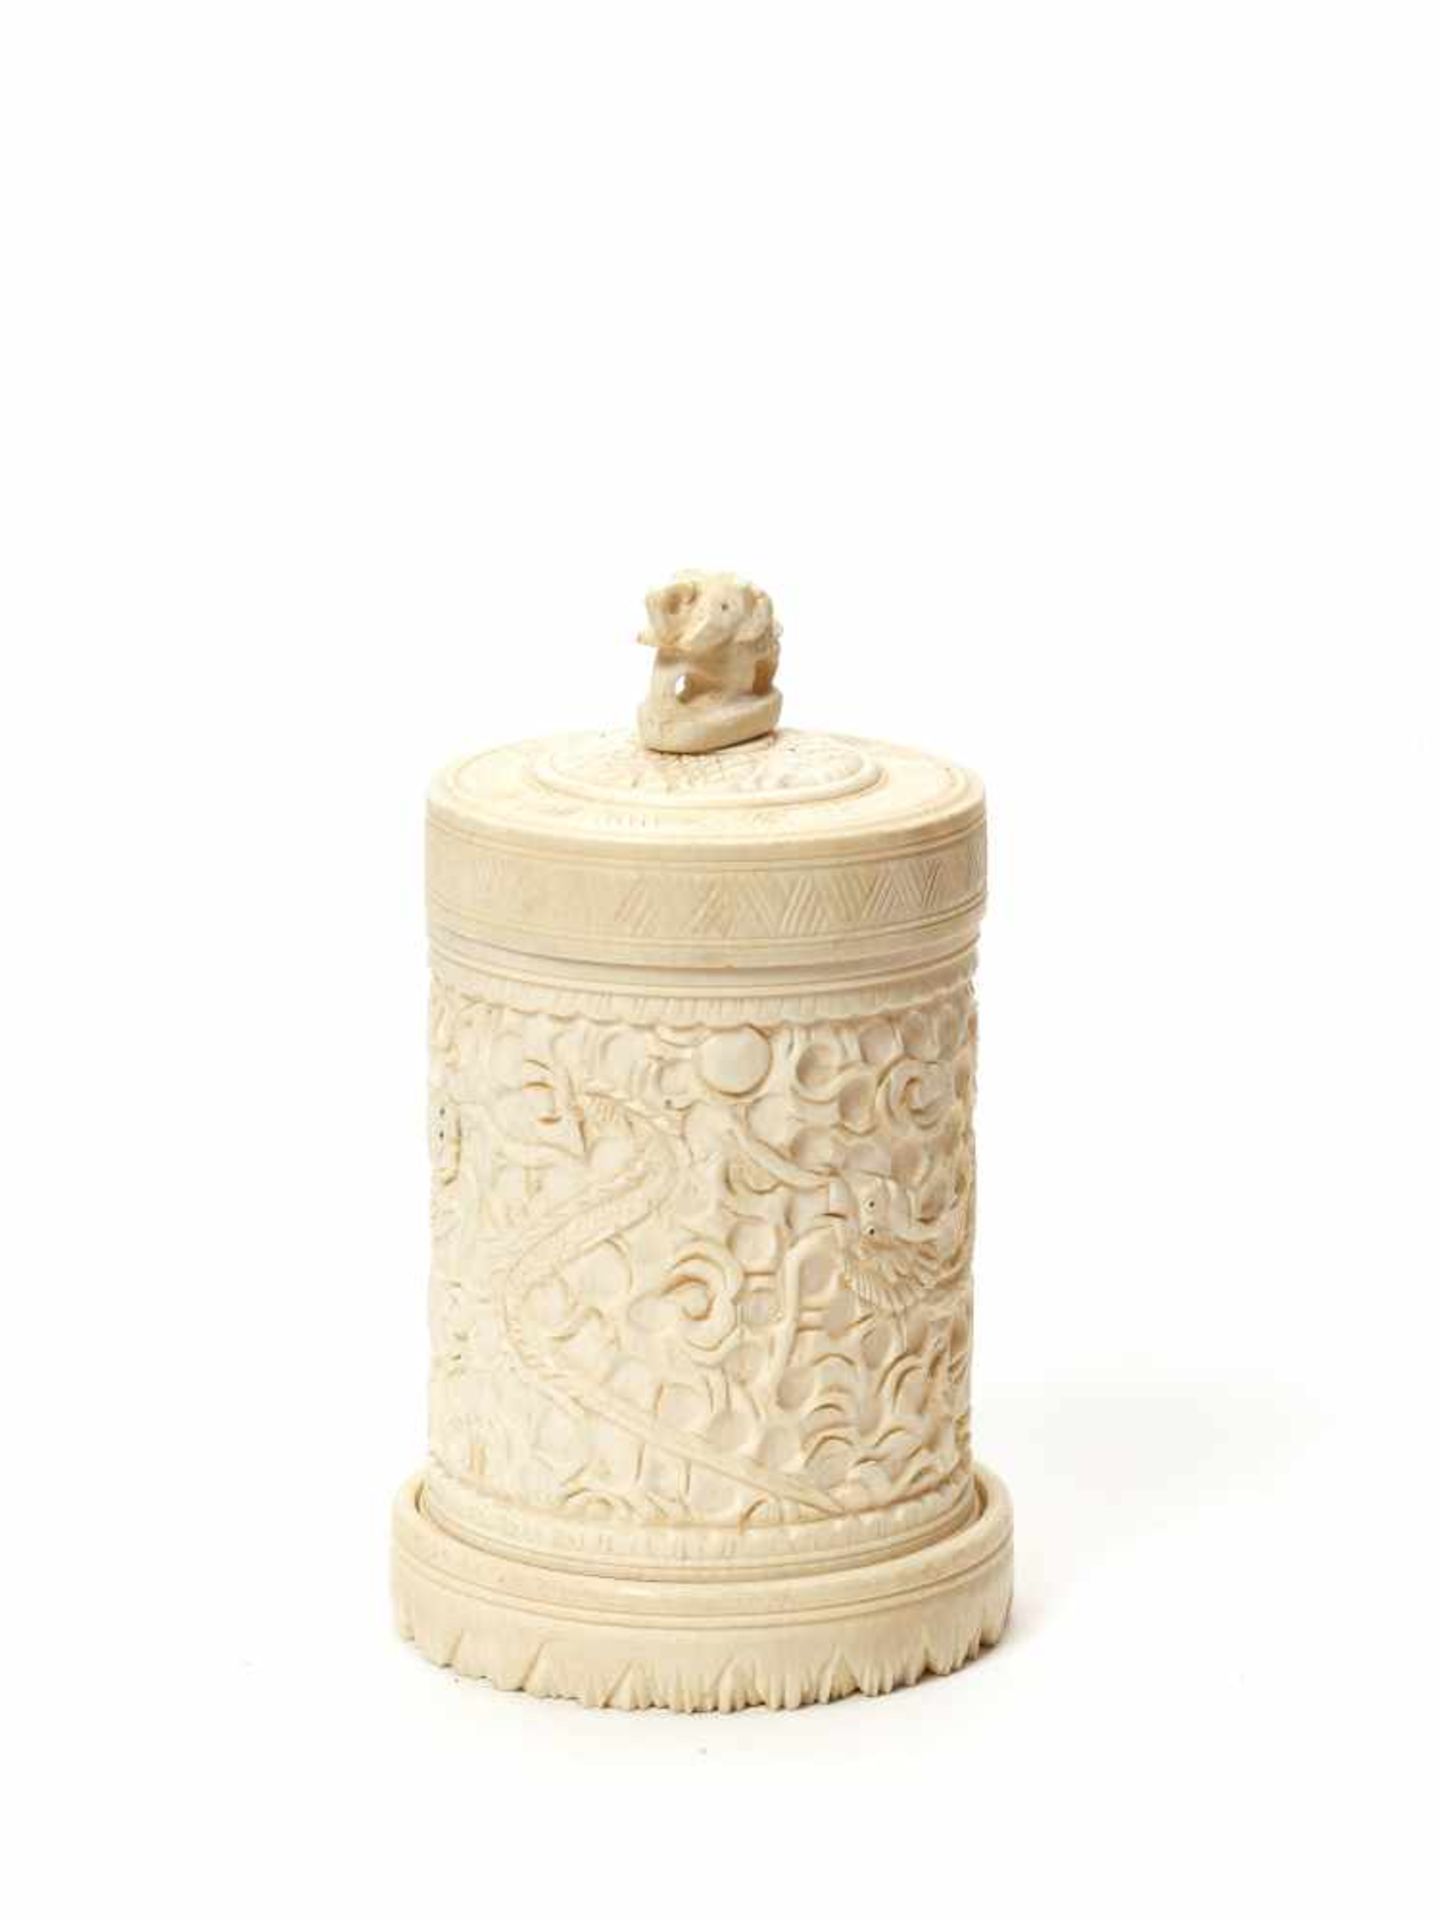 AN INDIAN IVORY BOX AND COVER, C. 1880IvoryIndia, c. 1880This Indian ivory box and cover features - Image 2 of 5